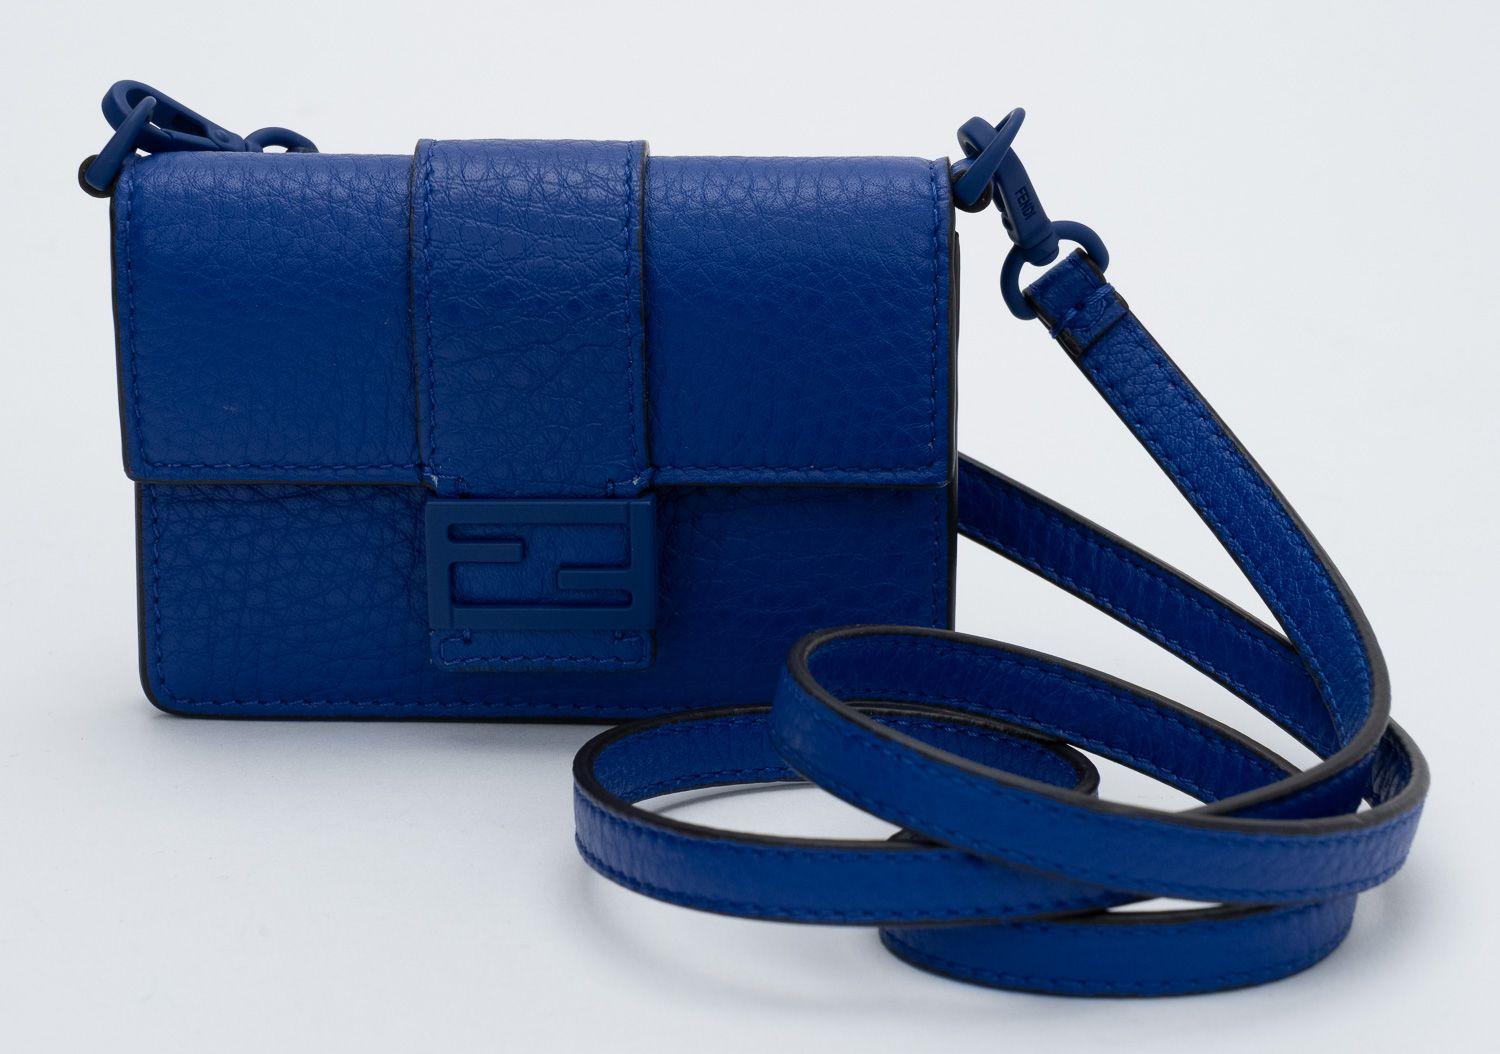 Fendi micro baguette in electric blue pebbled leather. Brand new in unworn condition. Fits credit cards and keys .Shoulder drop 18.5